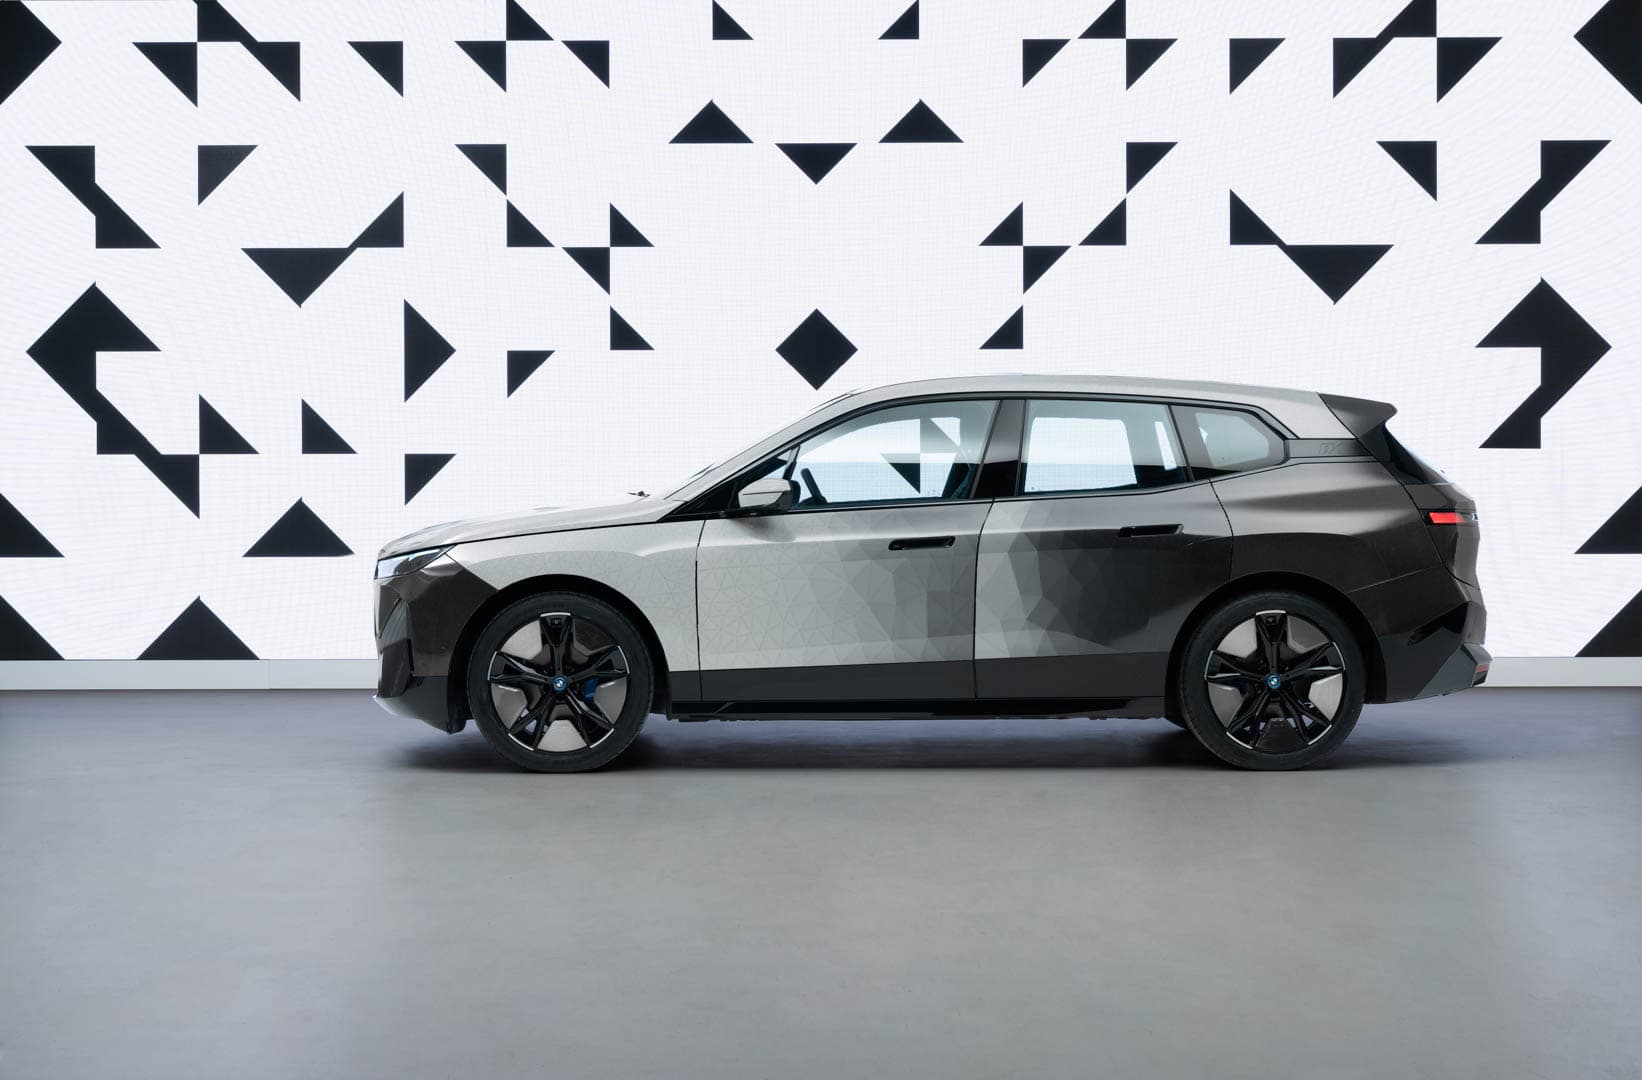 VIDEO: Watch the BMW iX Flow Featuring E Ink in Motion